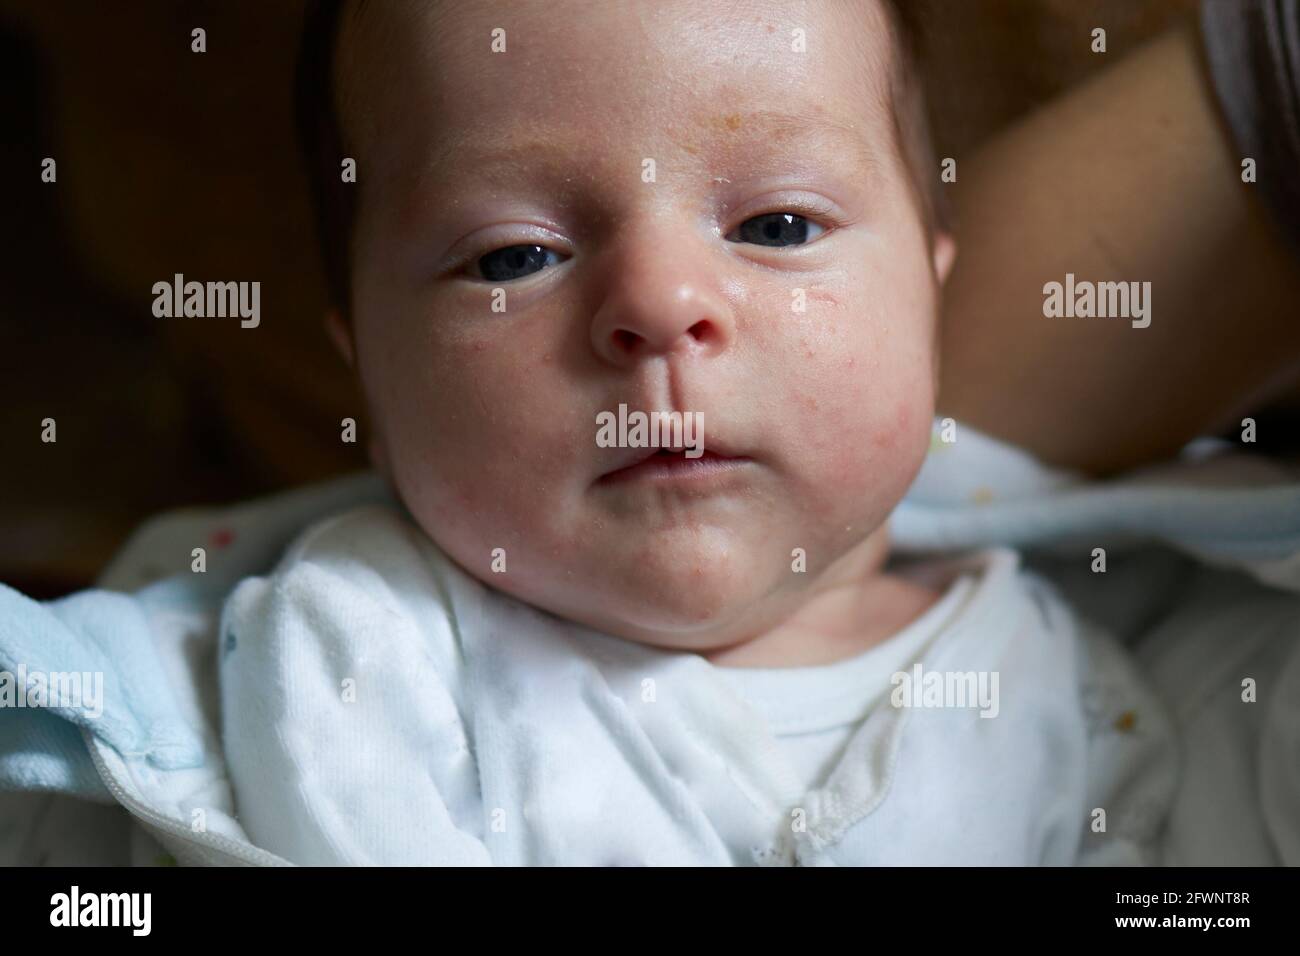 Tired baby after a long day Stock Photo